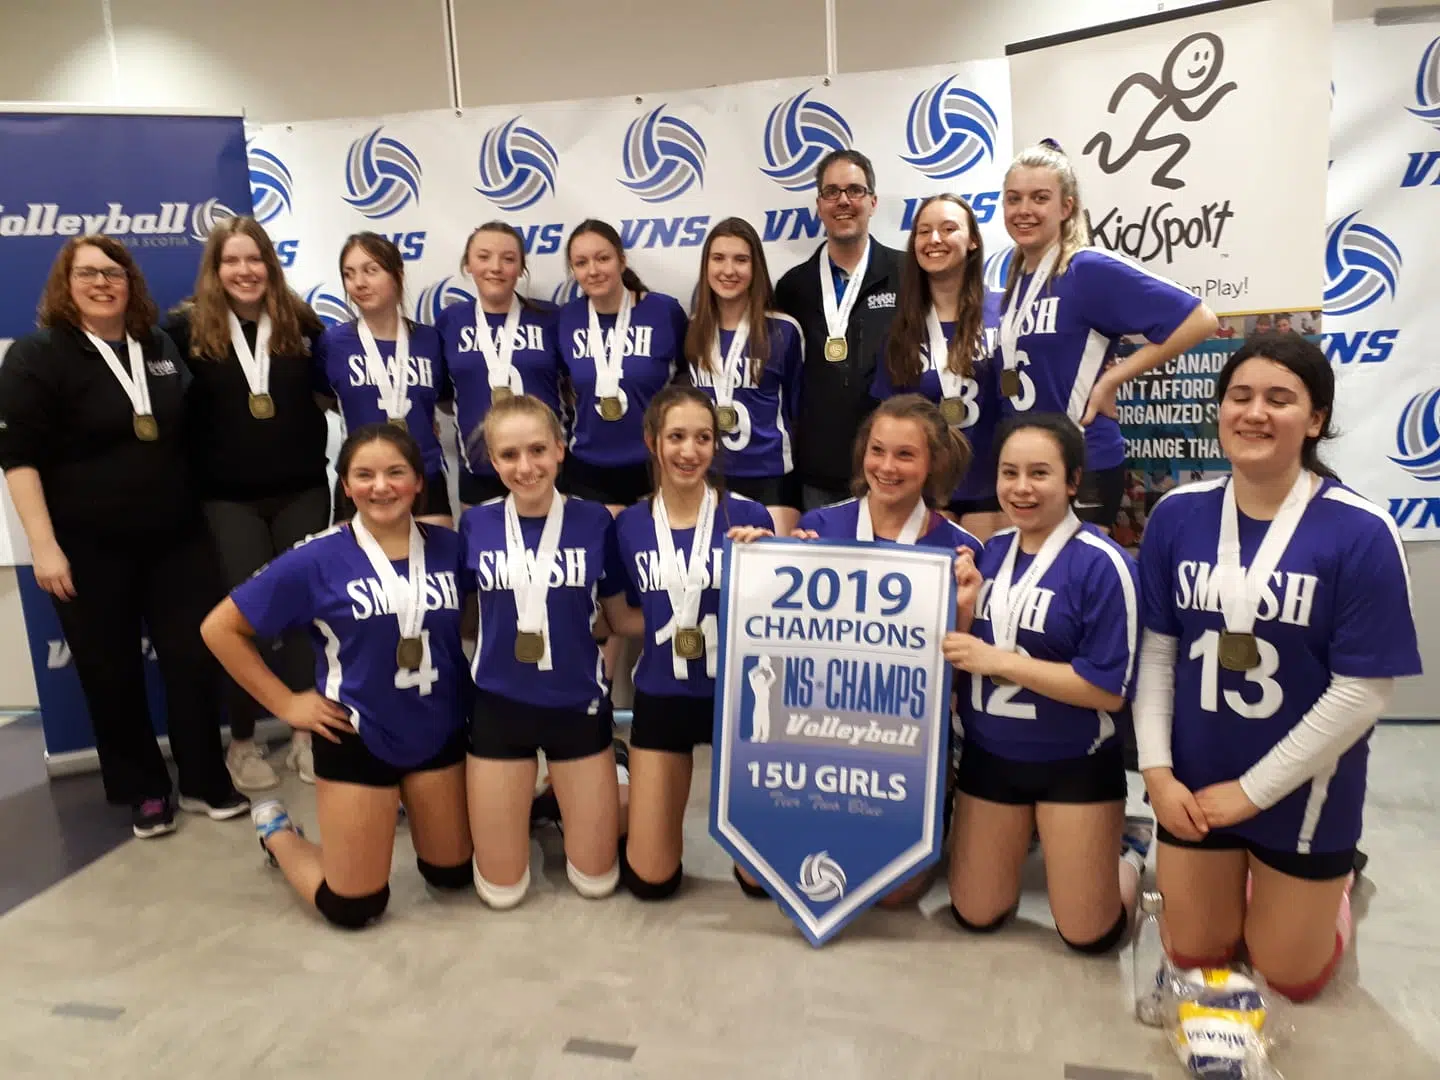 Under-15 Smash Tier 2 Volleyball Team Win Provincial Title